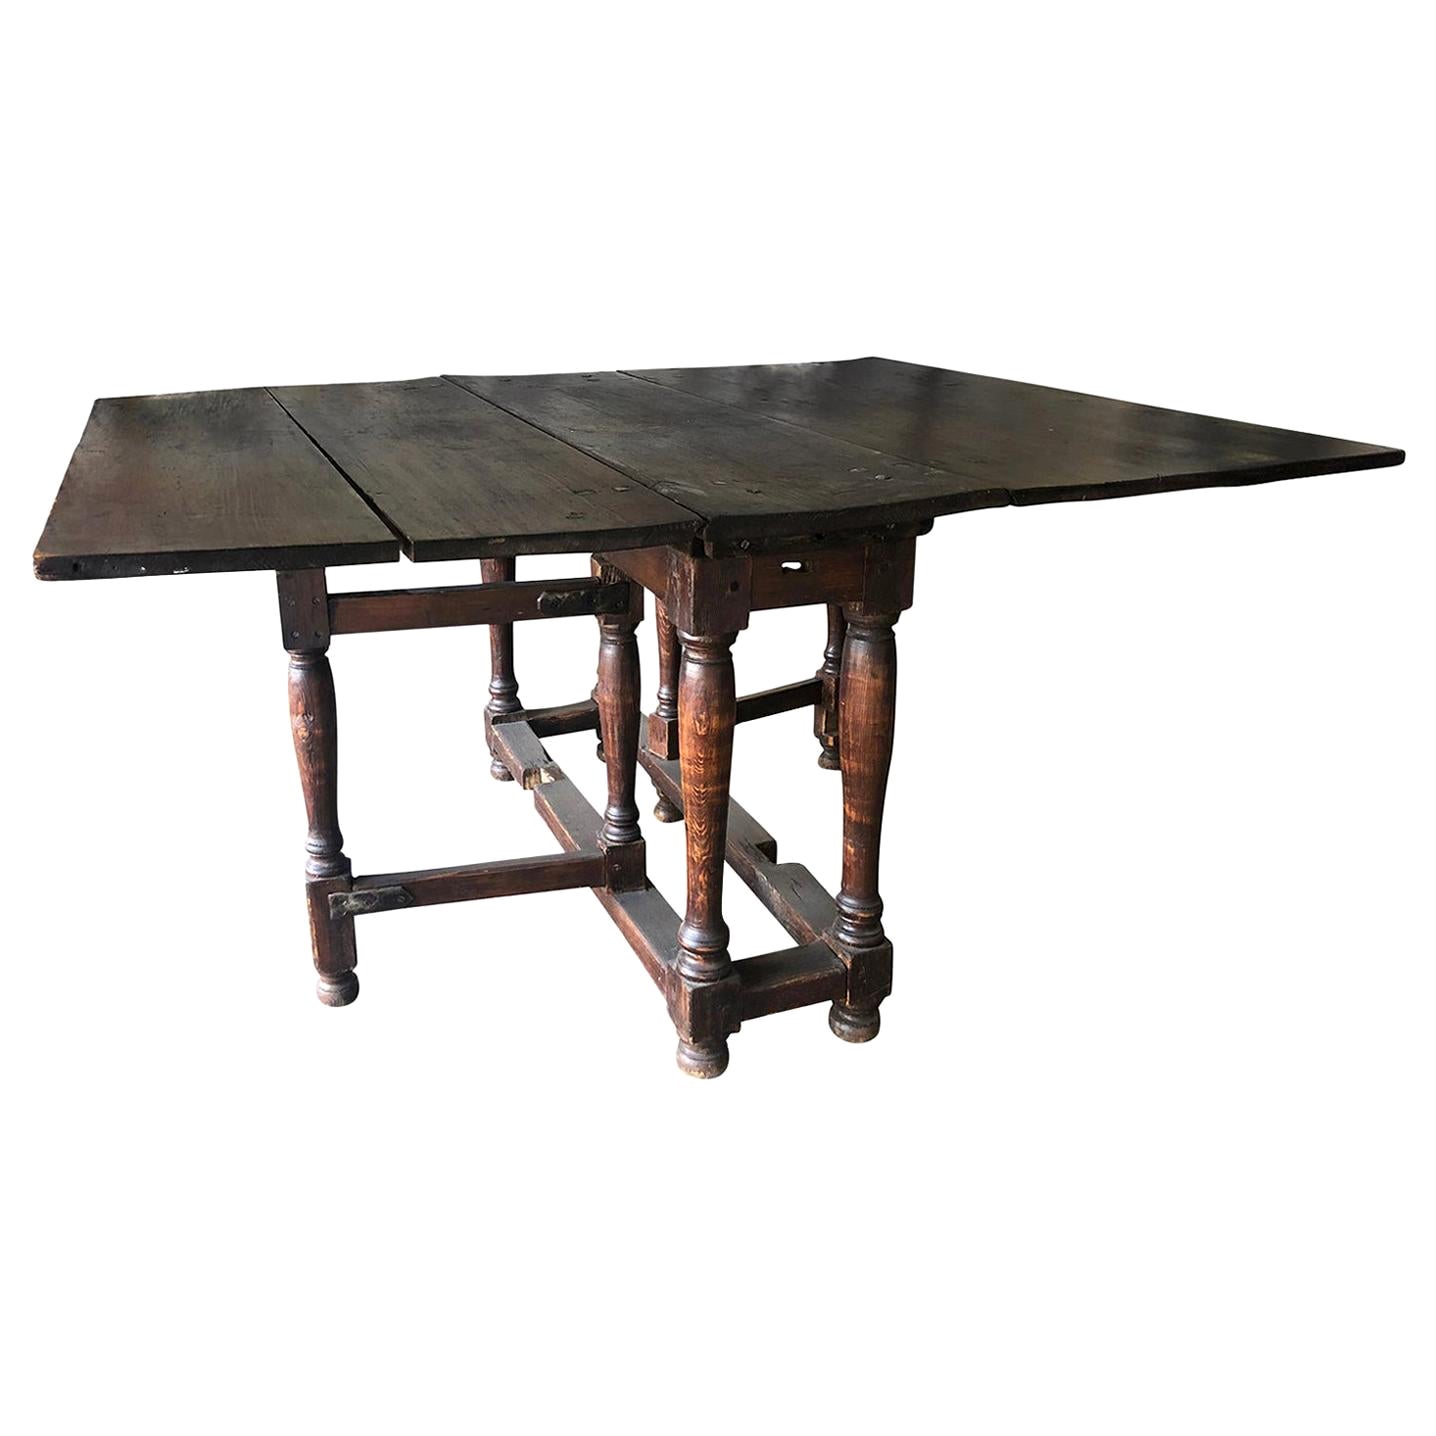 18th Century French Rustic Walnut Drop-Leaf Table - Antique Farmhouse Table For Sale